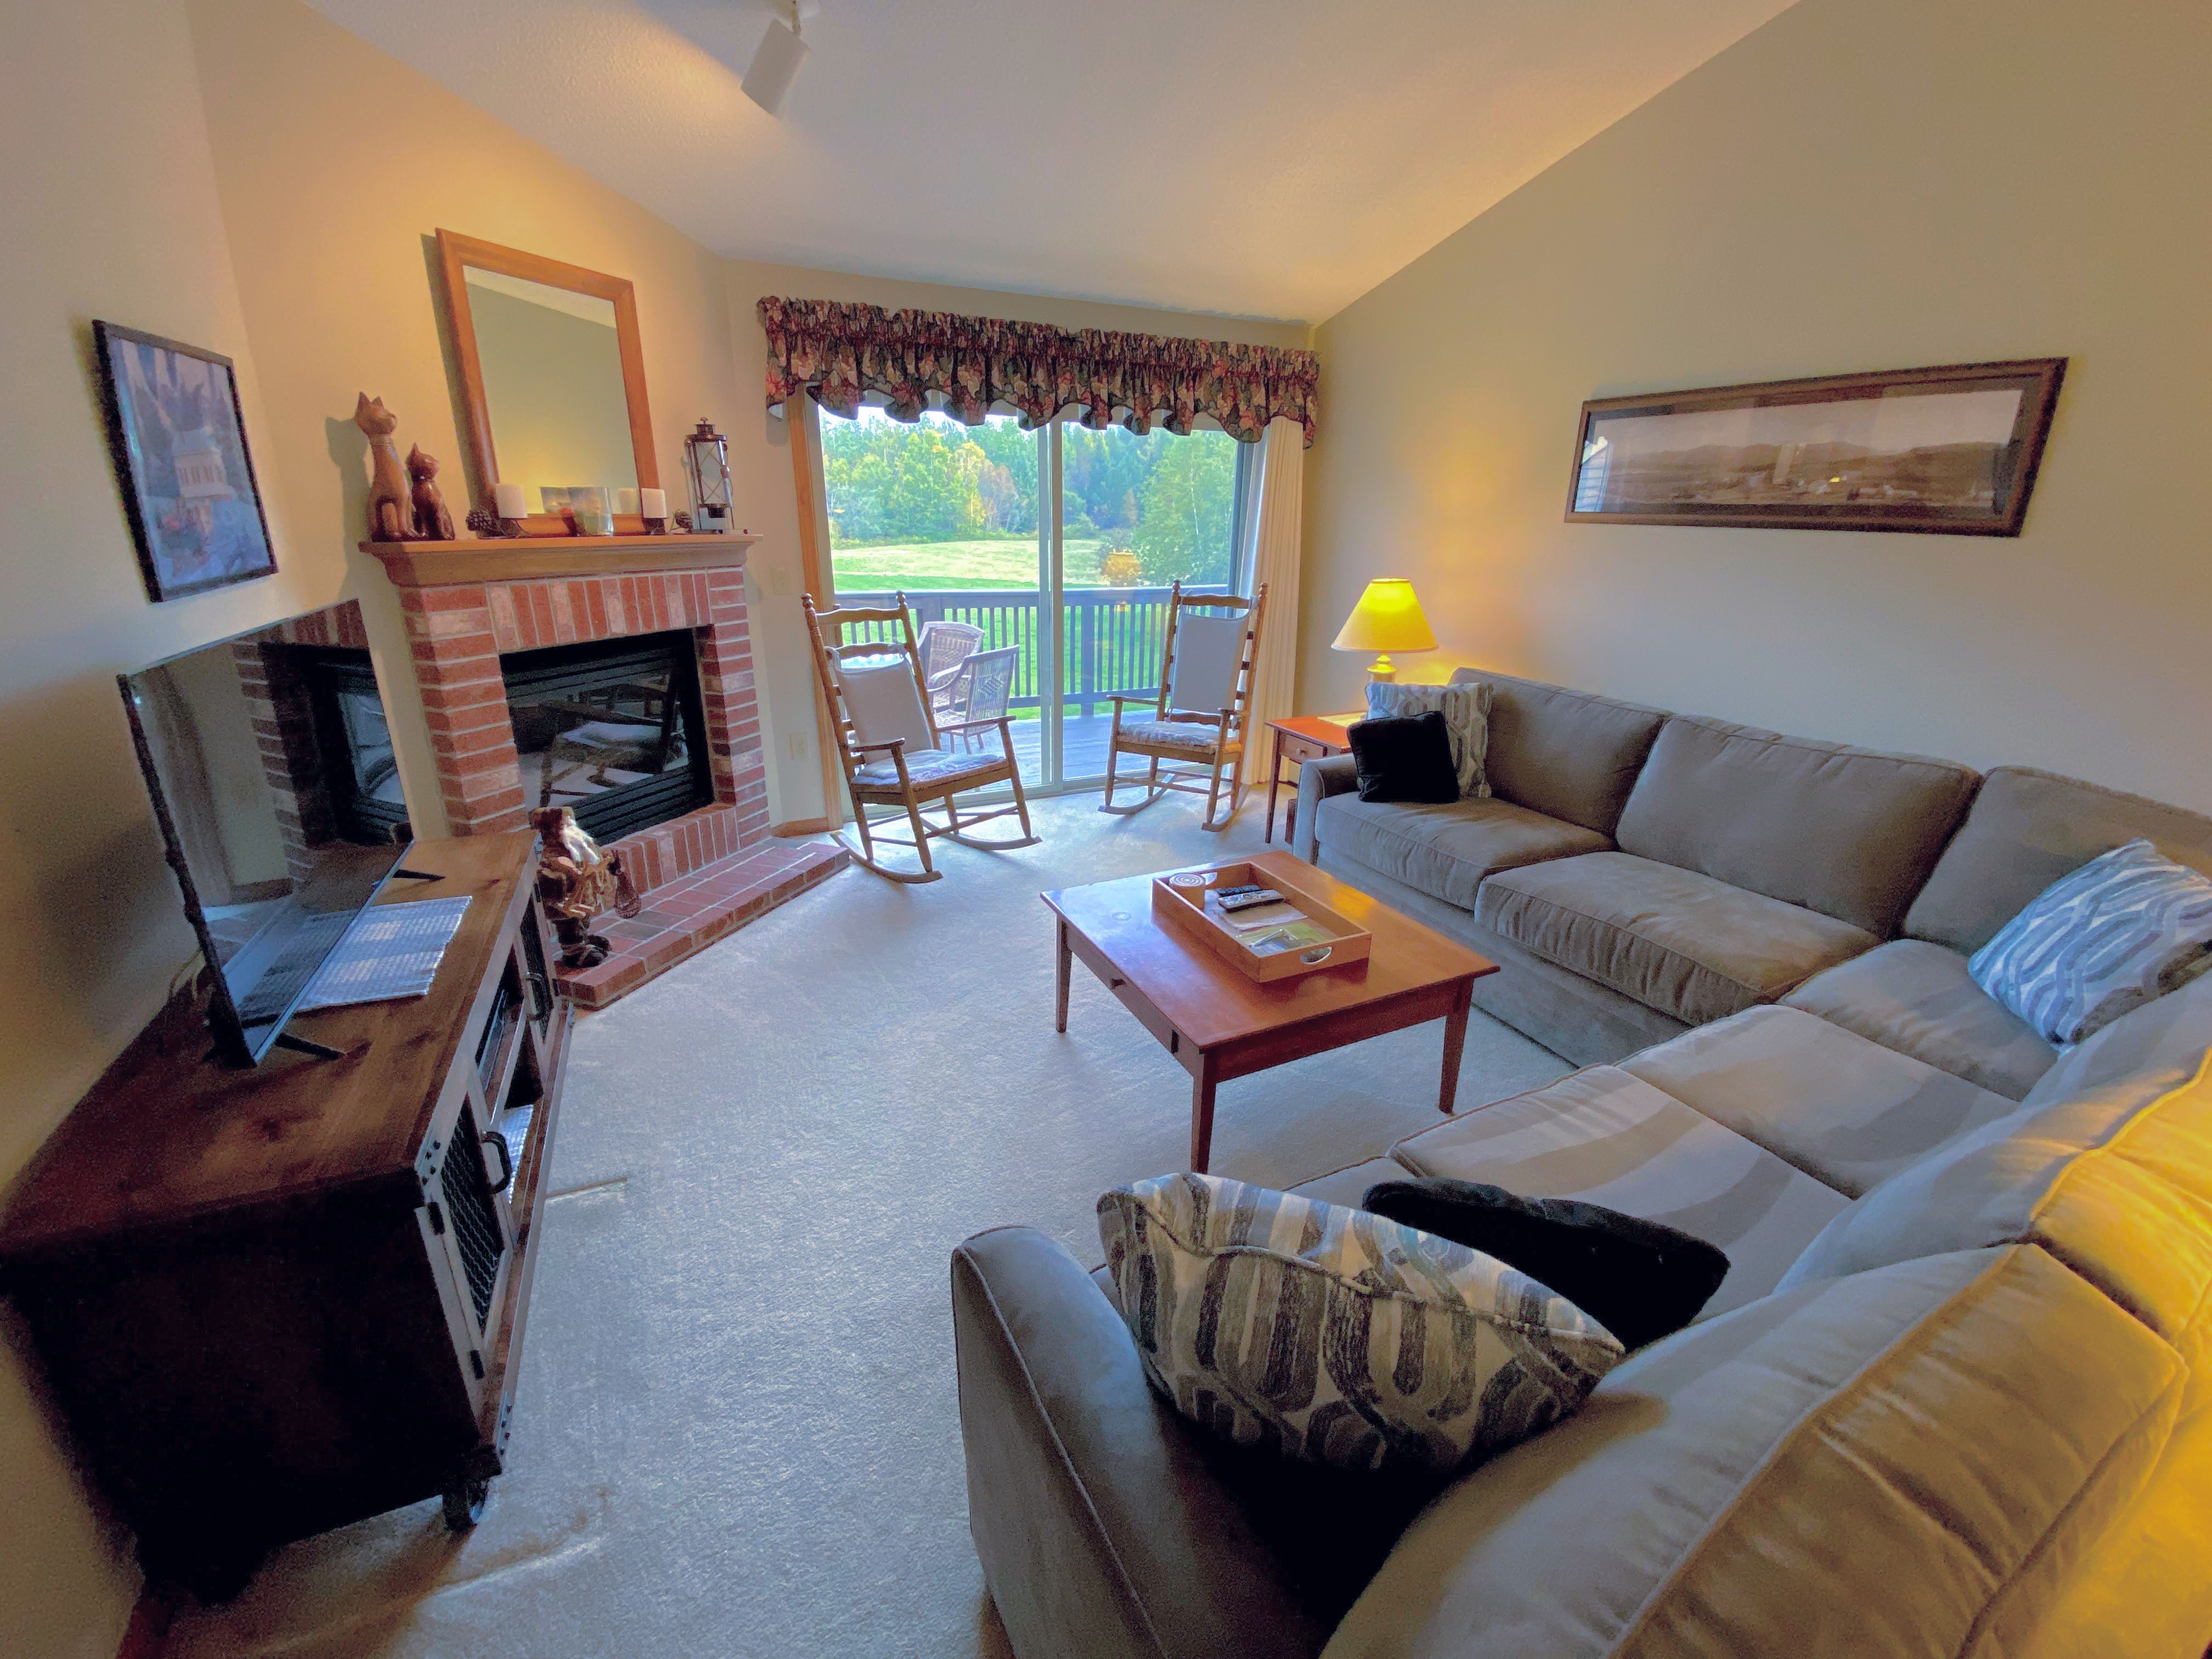 Property Image 2 - S3 AWESOME VIEW OF MOUNT WASHINGTON! Family getaway in Bretton Woods